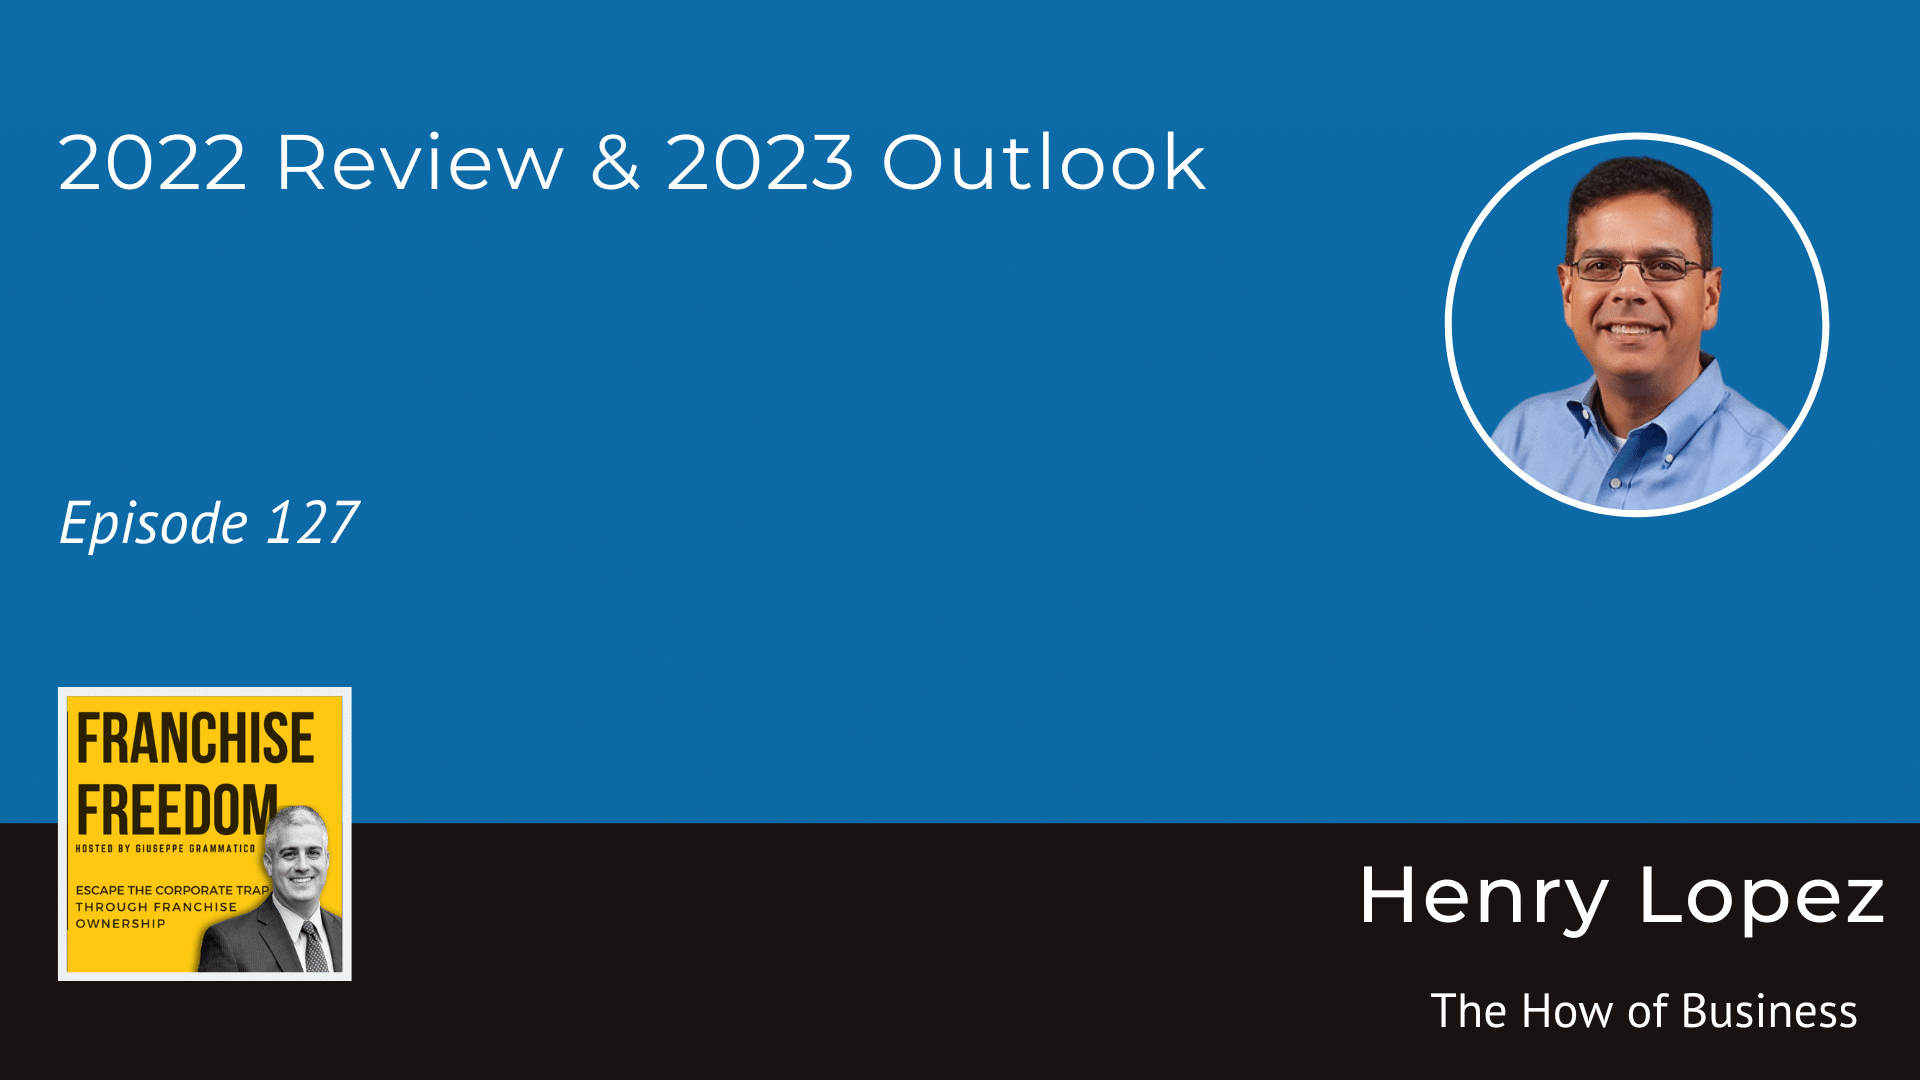 2022 Review & 2023 Outlook